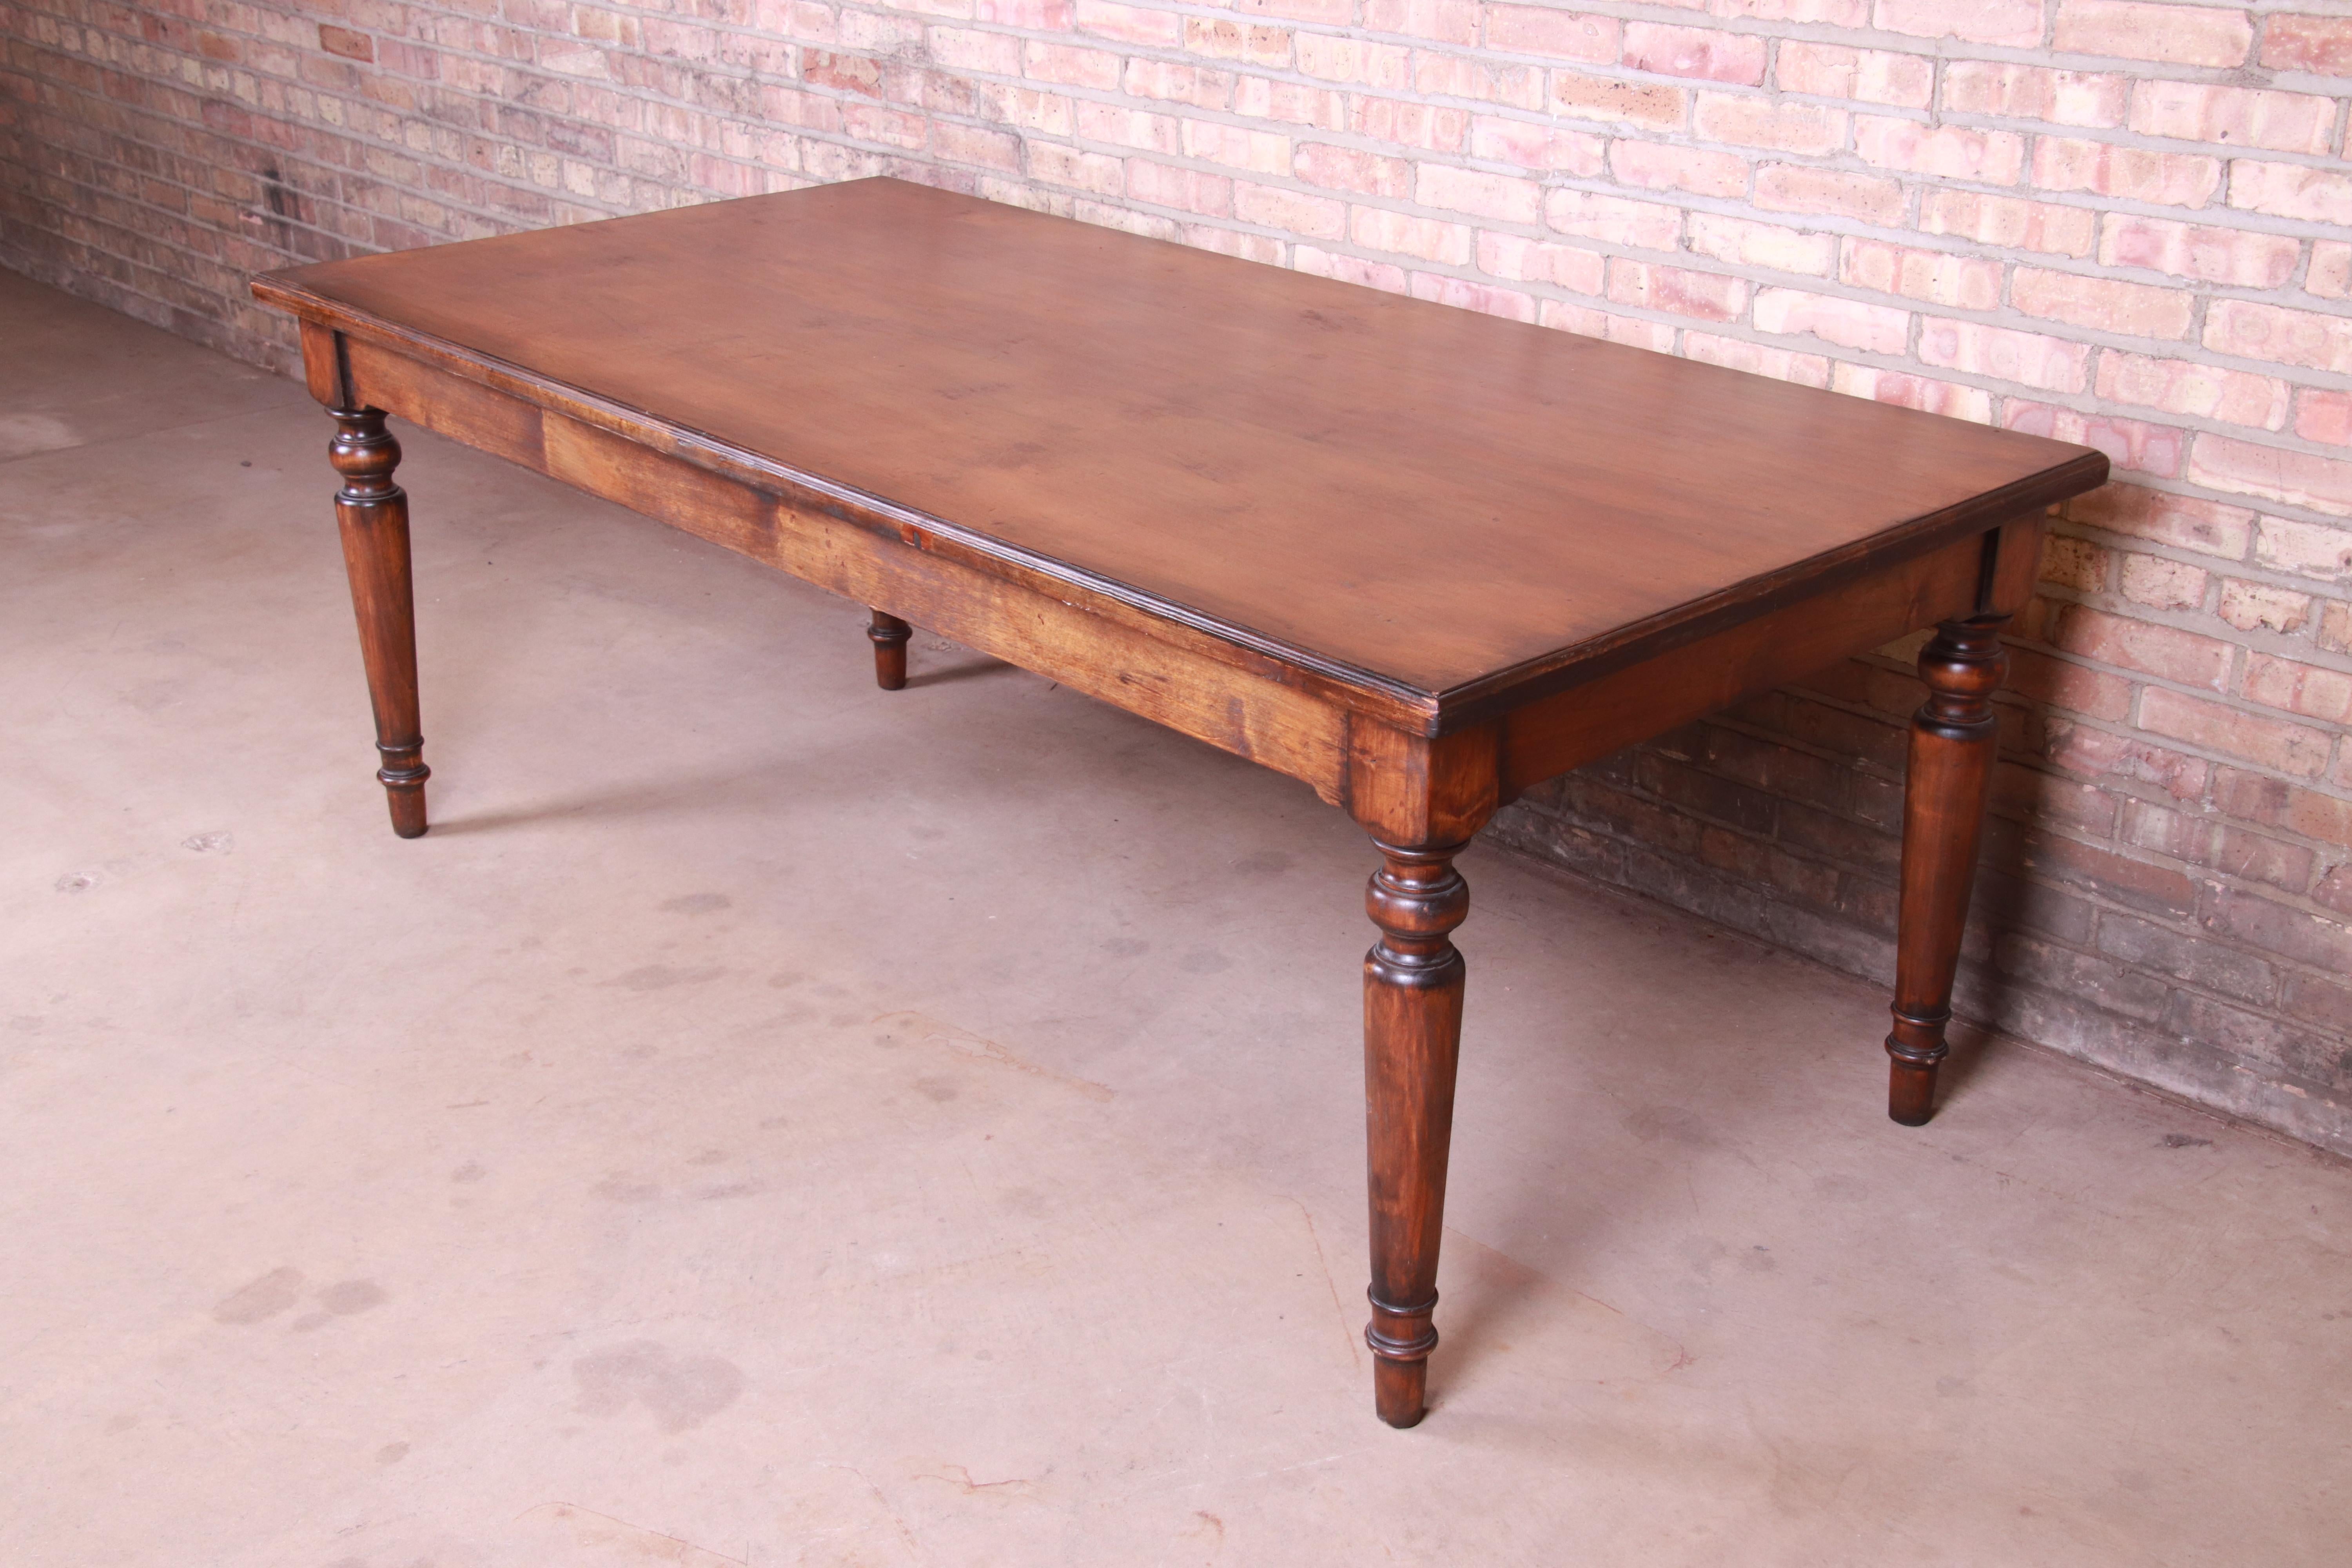 A gorgeous antique primitive solid pine harvest farm table with turned legs

France, 19th century

Measures: 78.5